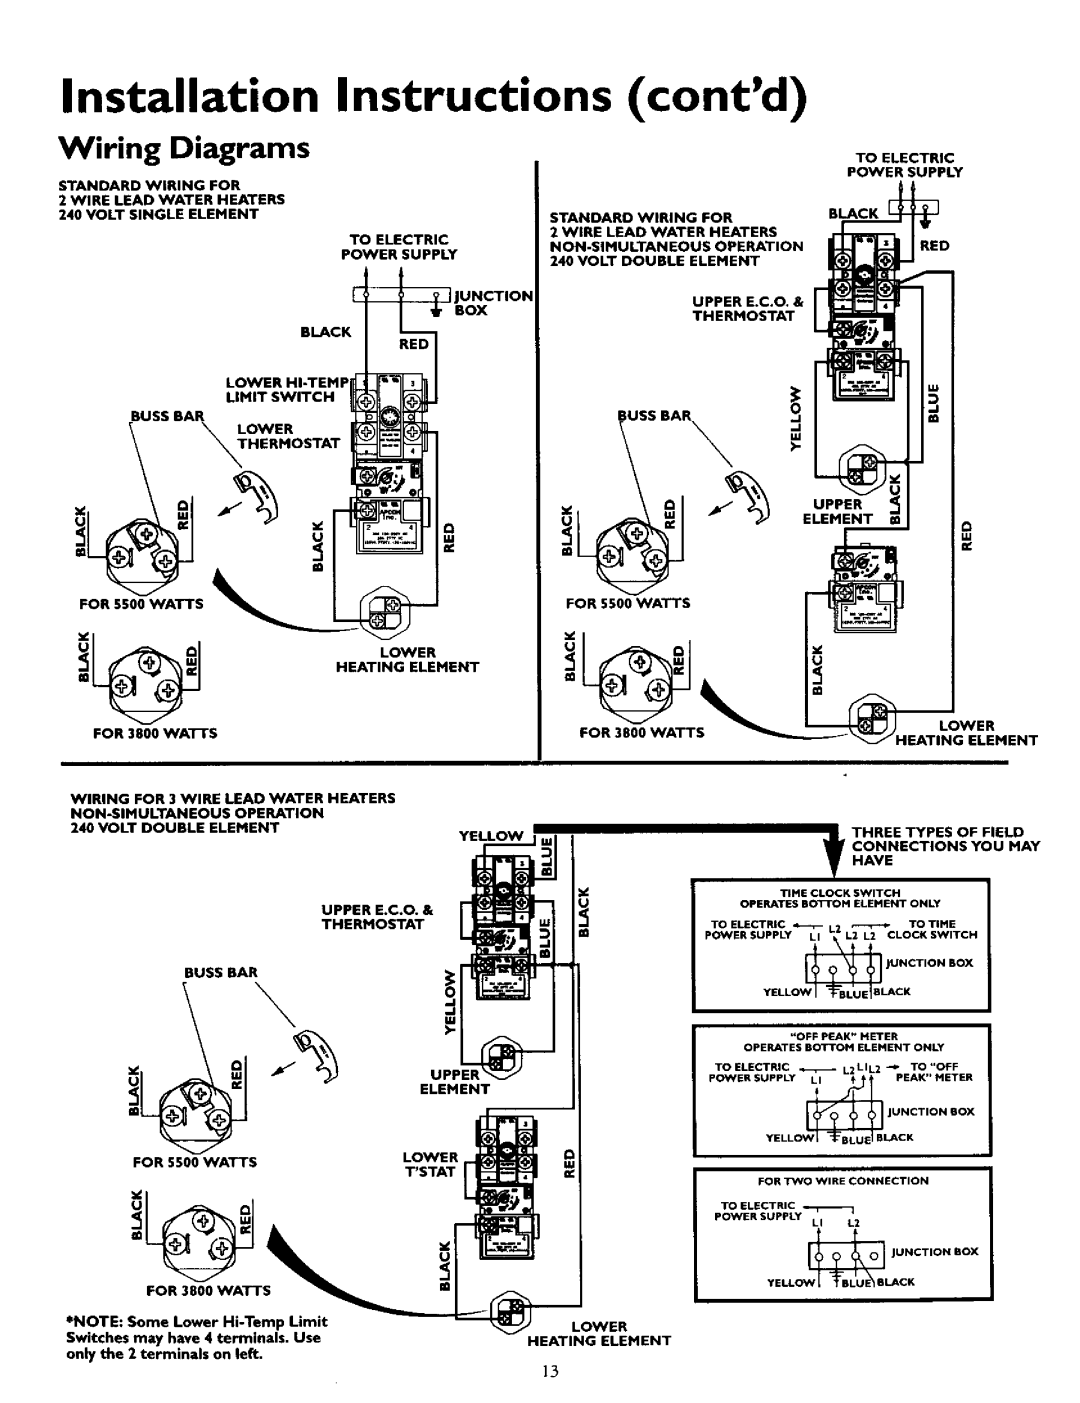 Kenmore 153.327664, 153.327864, 153.327264, 153.327463 Installation Instructions contd, Wiring Diagrams, FOR 5500 WATTS 